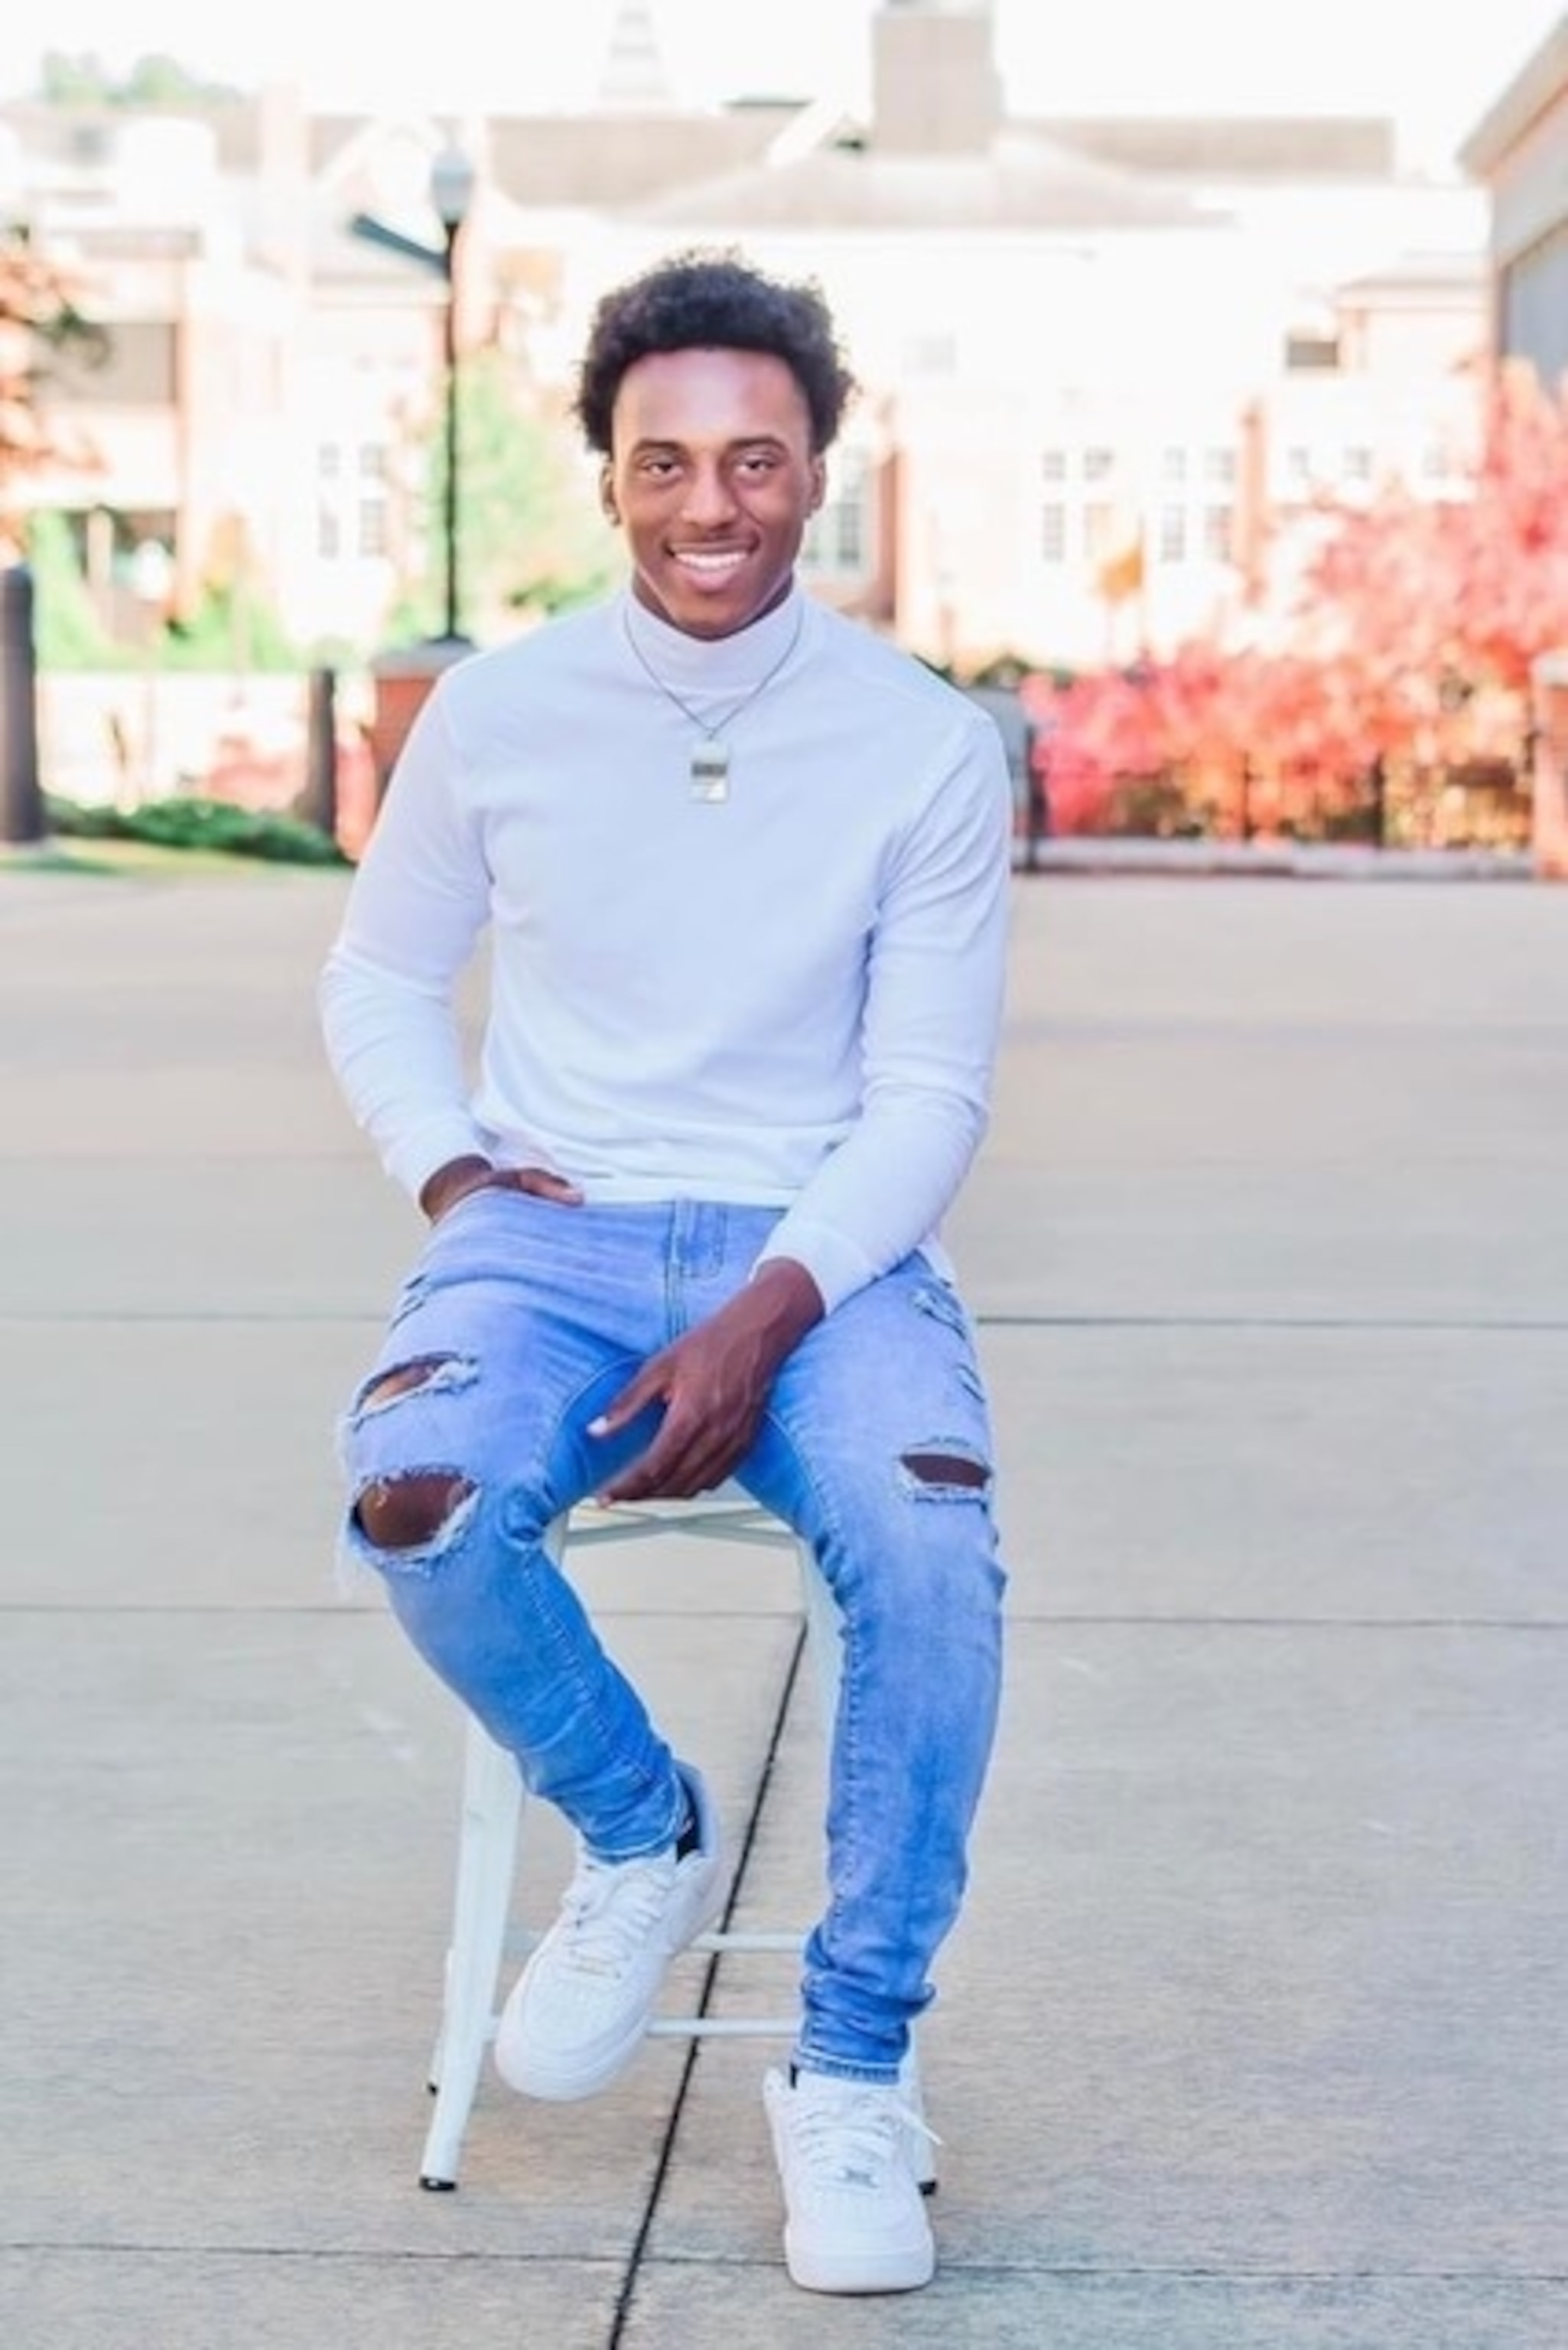 PHOTO: Marsiah Collins, 19, shown in this undated photo, was among four people gunned down at an April 15, 2023, shooting at a Sweet 16 birthday party in Dadeville, Alabama, where police said they collected 89 shell casings at the scene.